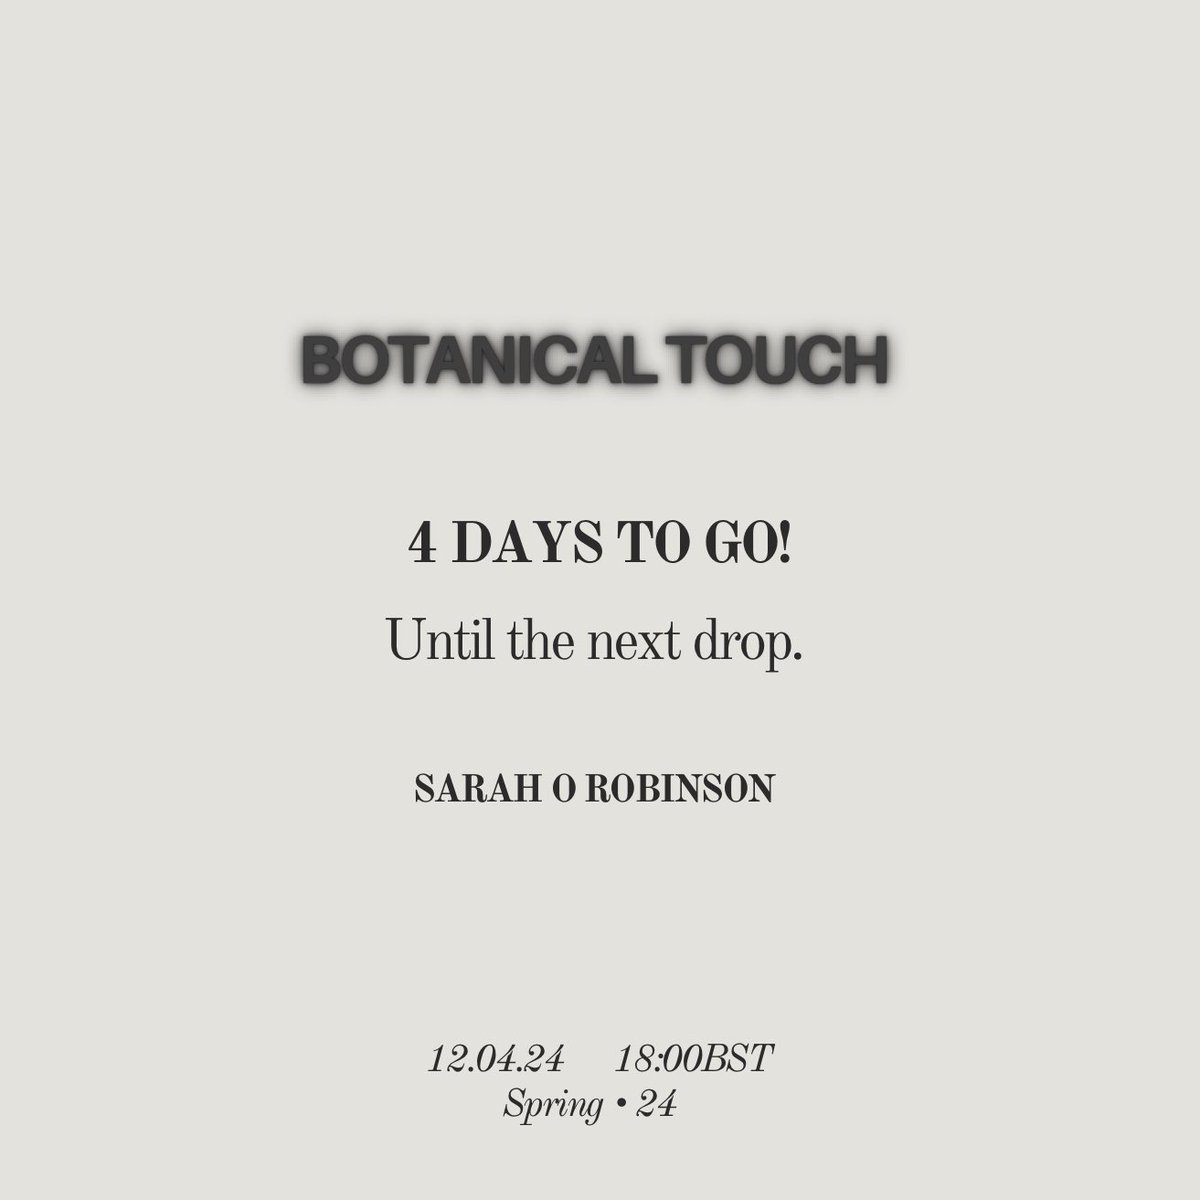 ONLY 4 DAYS TO GO UNTIL THE NEXT DROP for Botanical Touch!

#newcollection #collection #comingsoon #fashion #fashioncollection #spring #springfashion #springstyle #springsummer #springoutfit #botanical